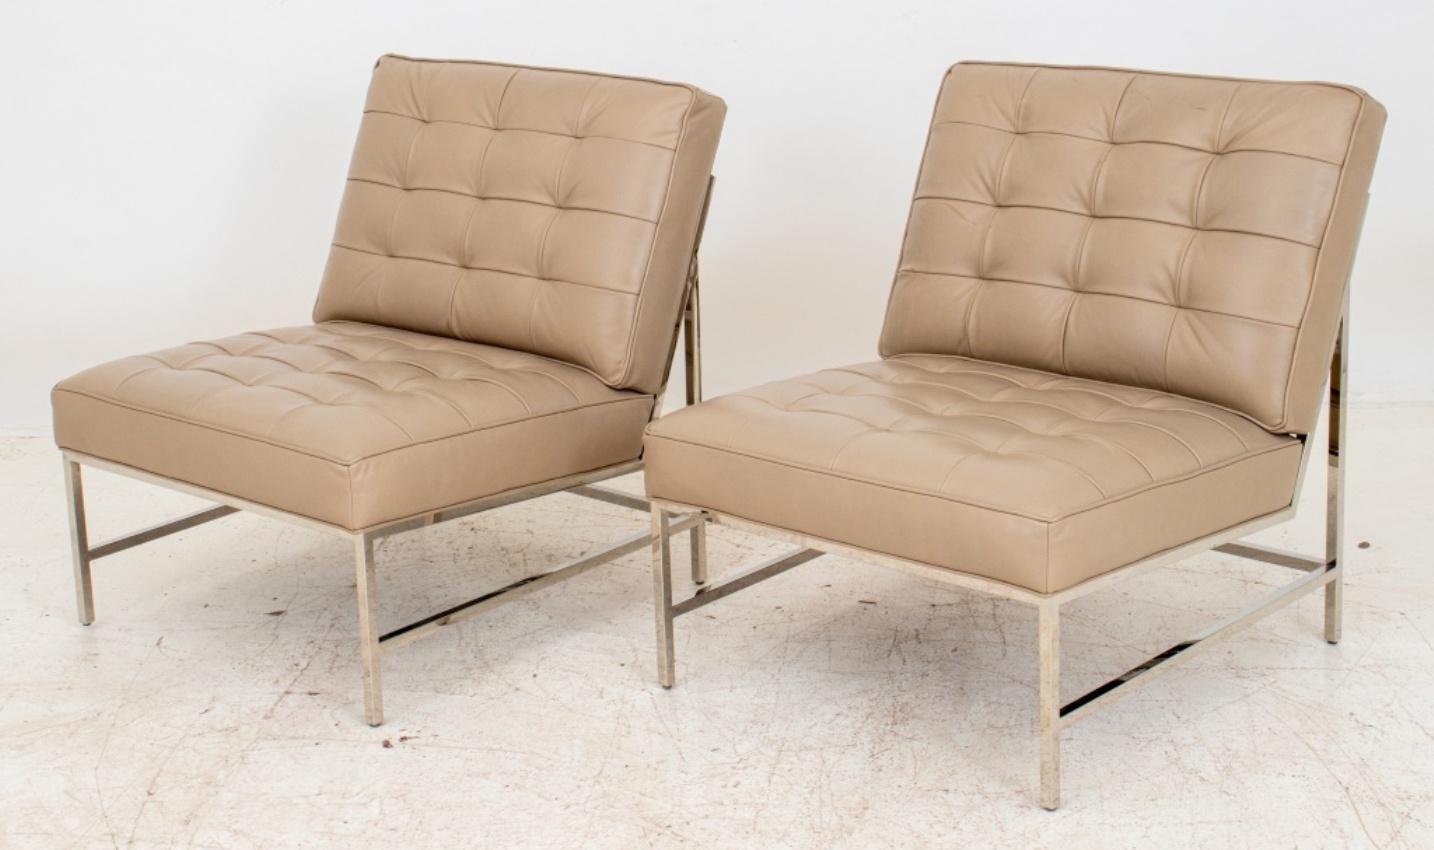 Florence Knoll manner Mitchell Gold + Bob Williams (American, founded 1989), contemporary pair of 